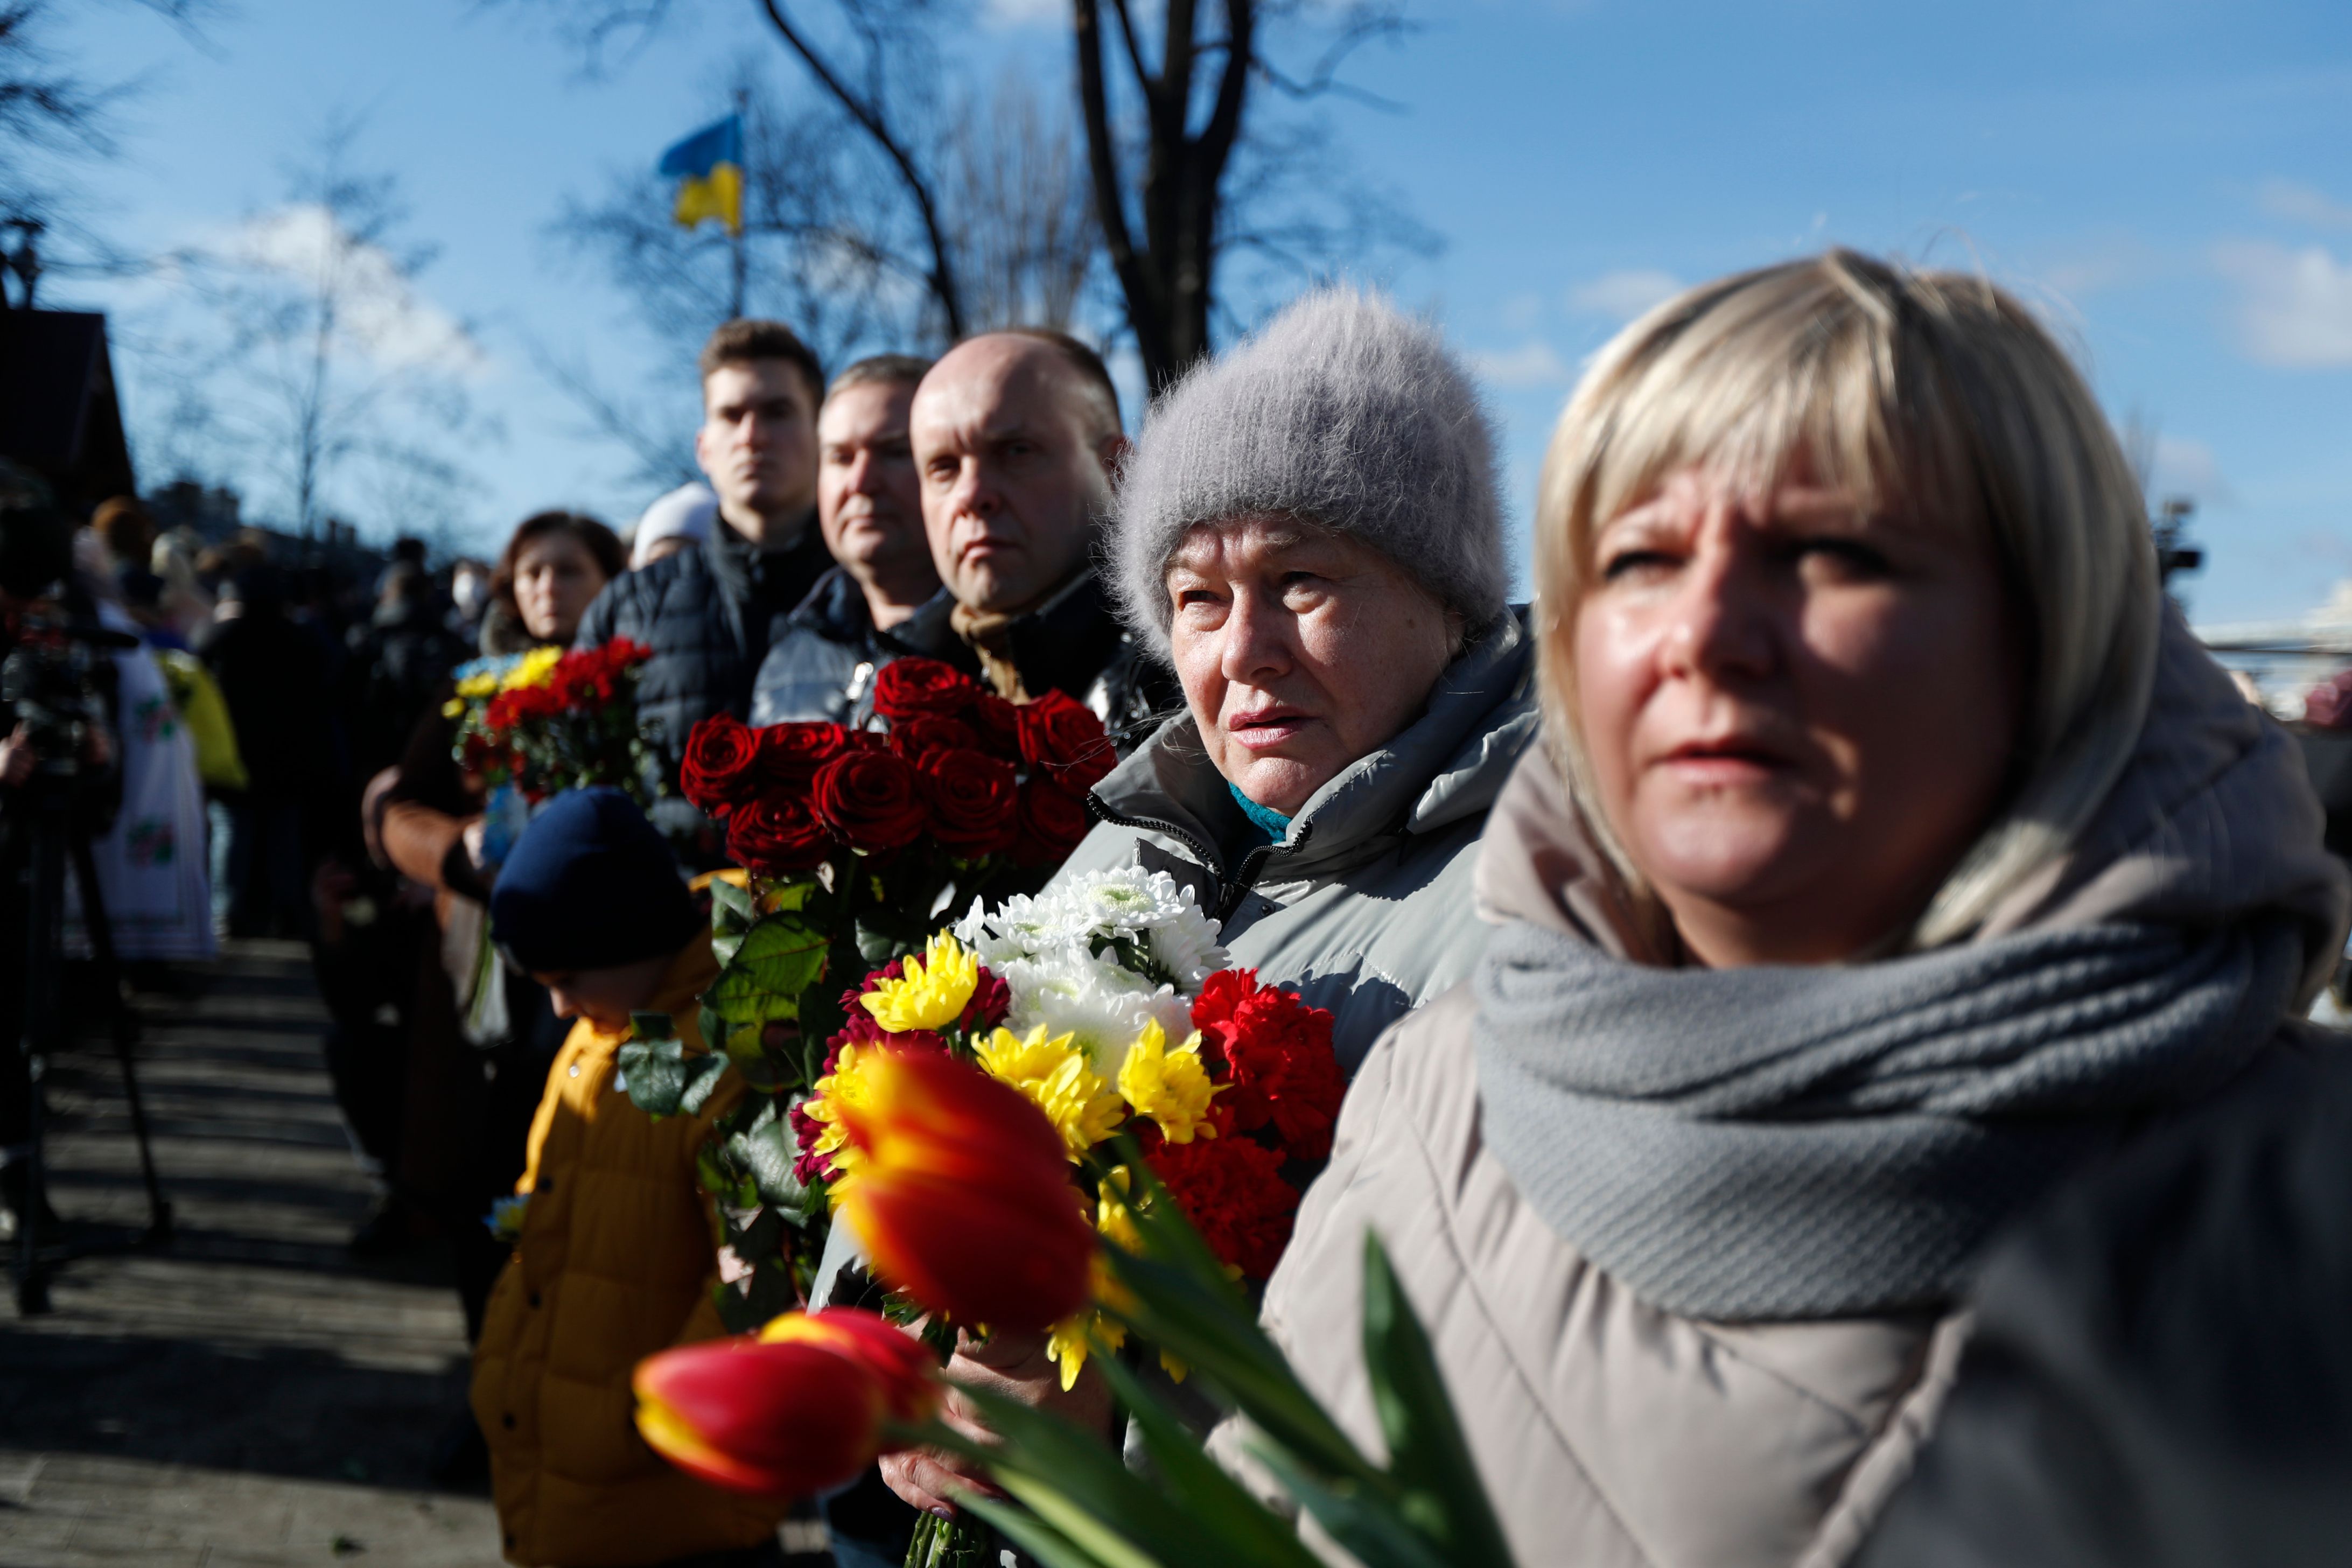 Ukrainians commemorate activists killed at Maidan Square during the 2014 anti-government protests in Kyiv, on Sunday February 20.